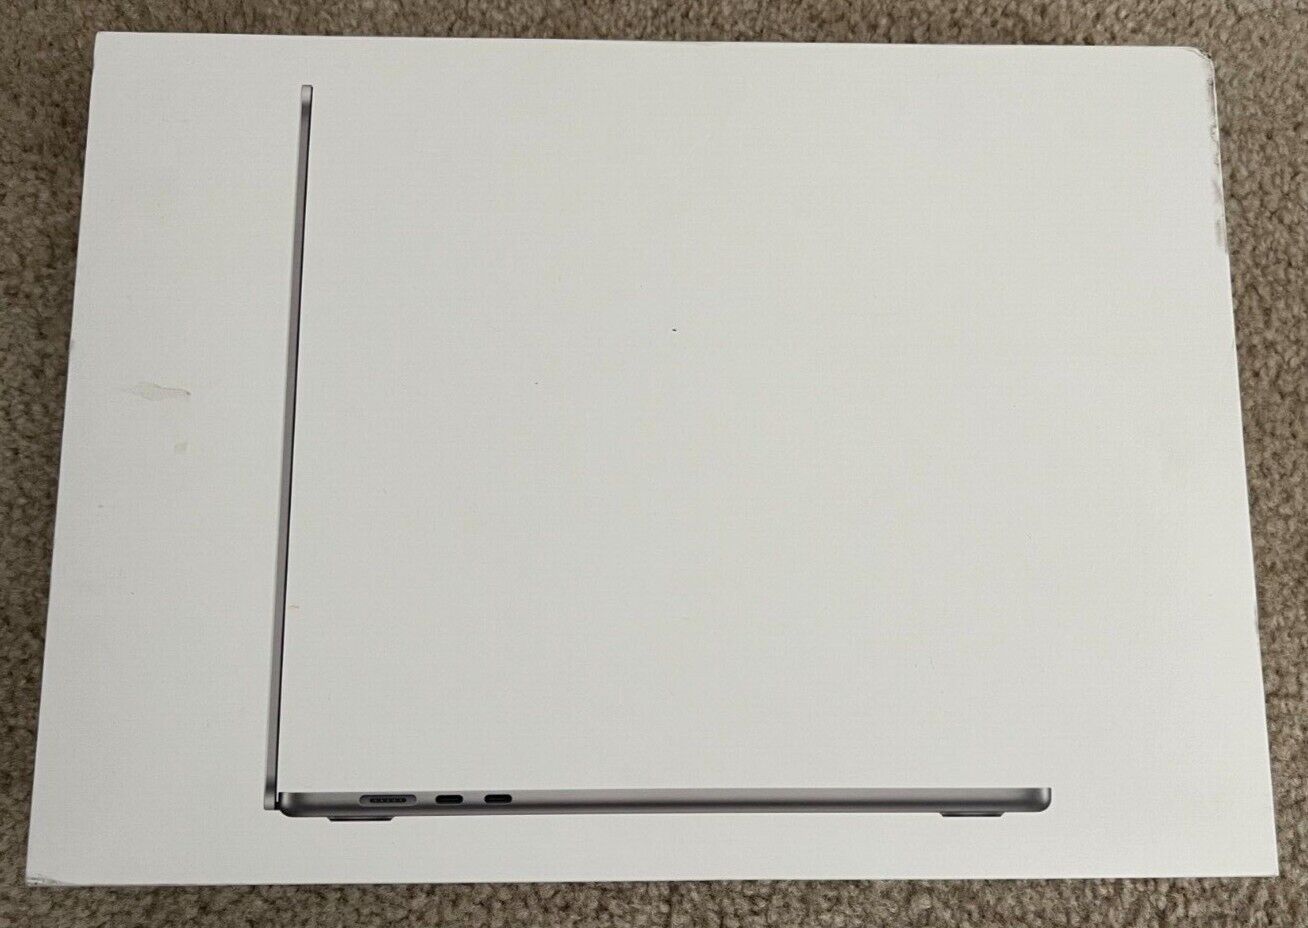 BRAND New AppleMacBook Air 15 Laptop: M3 chip, Silver, 8GB RAM, 256GB SSD SEALED